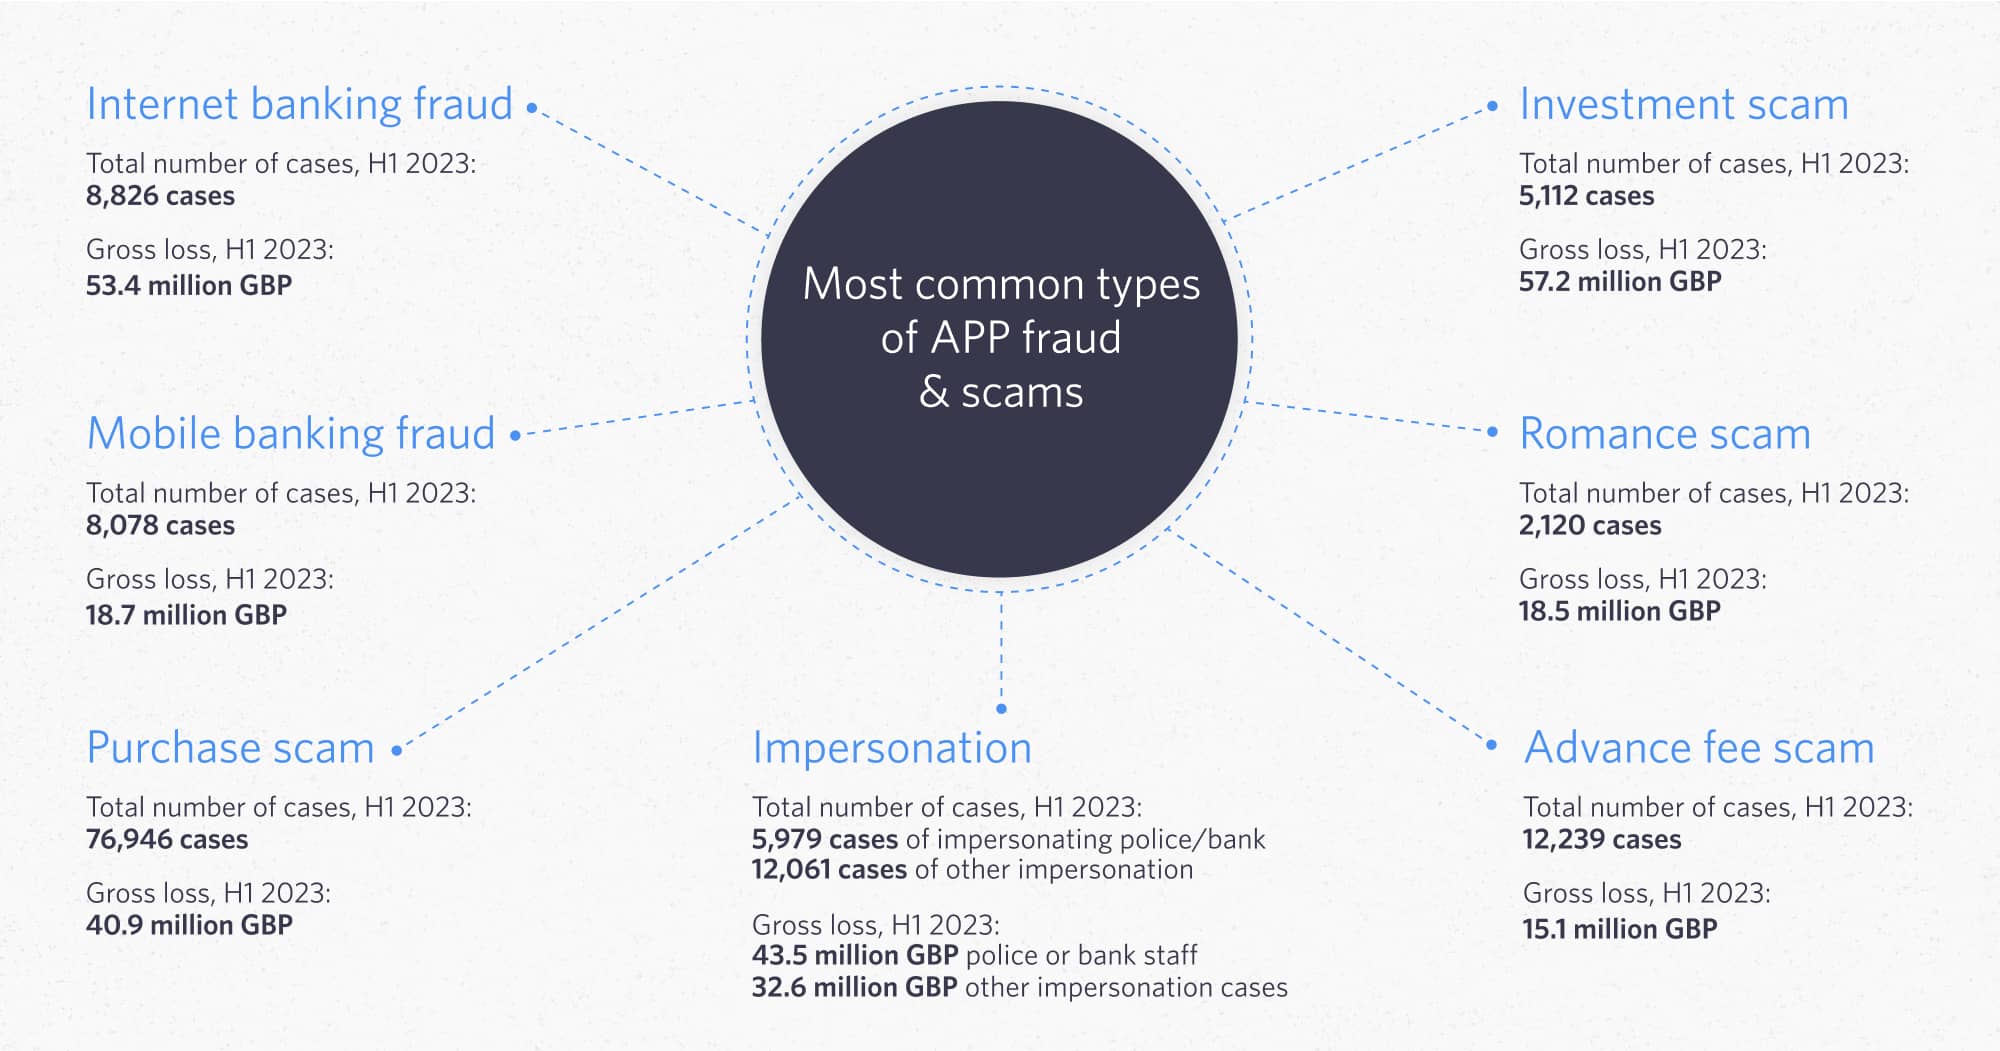 Most common types of APP fraud and scams